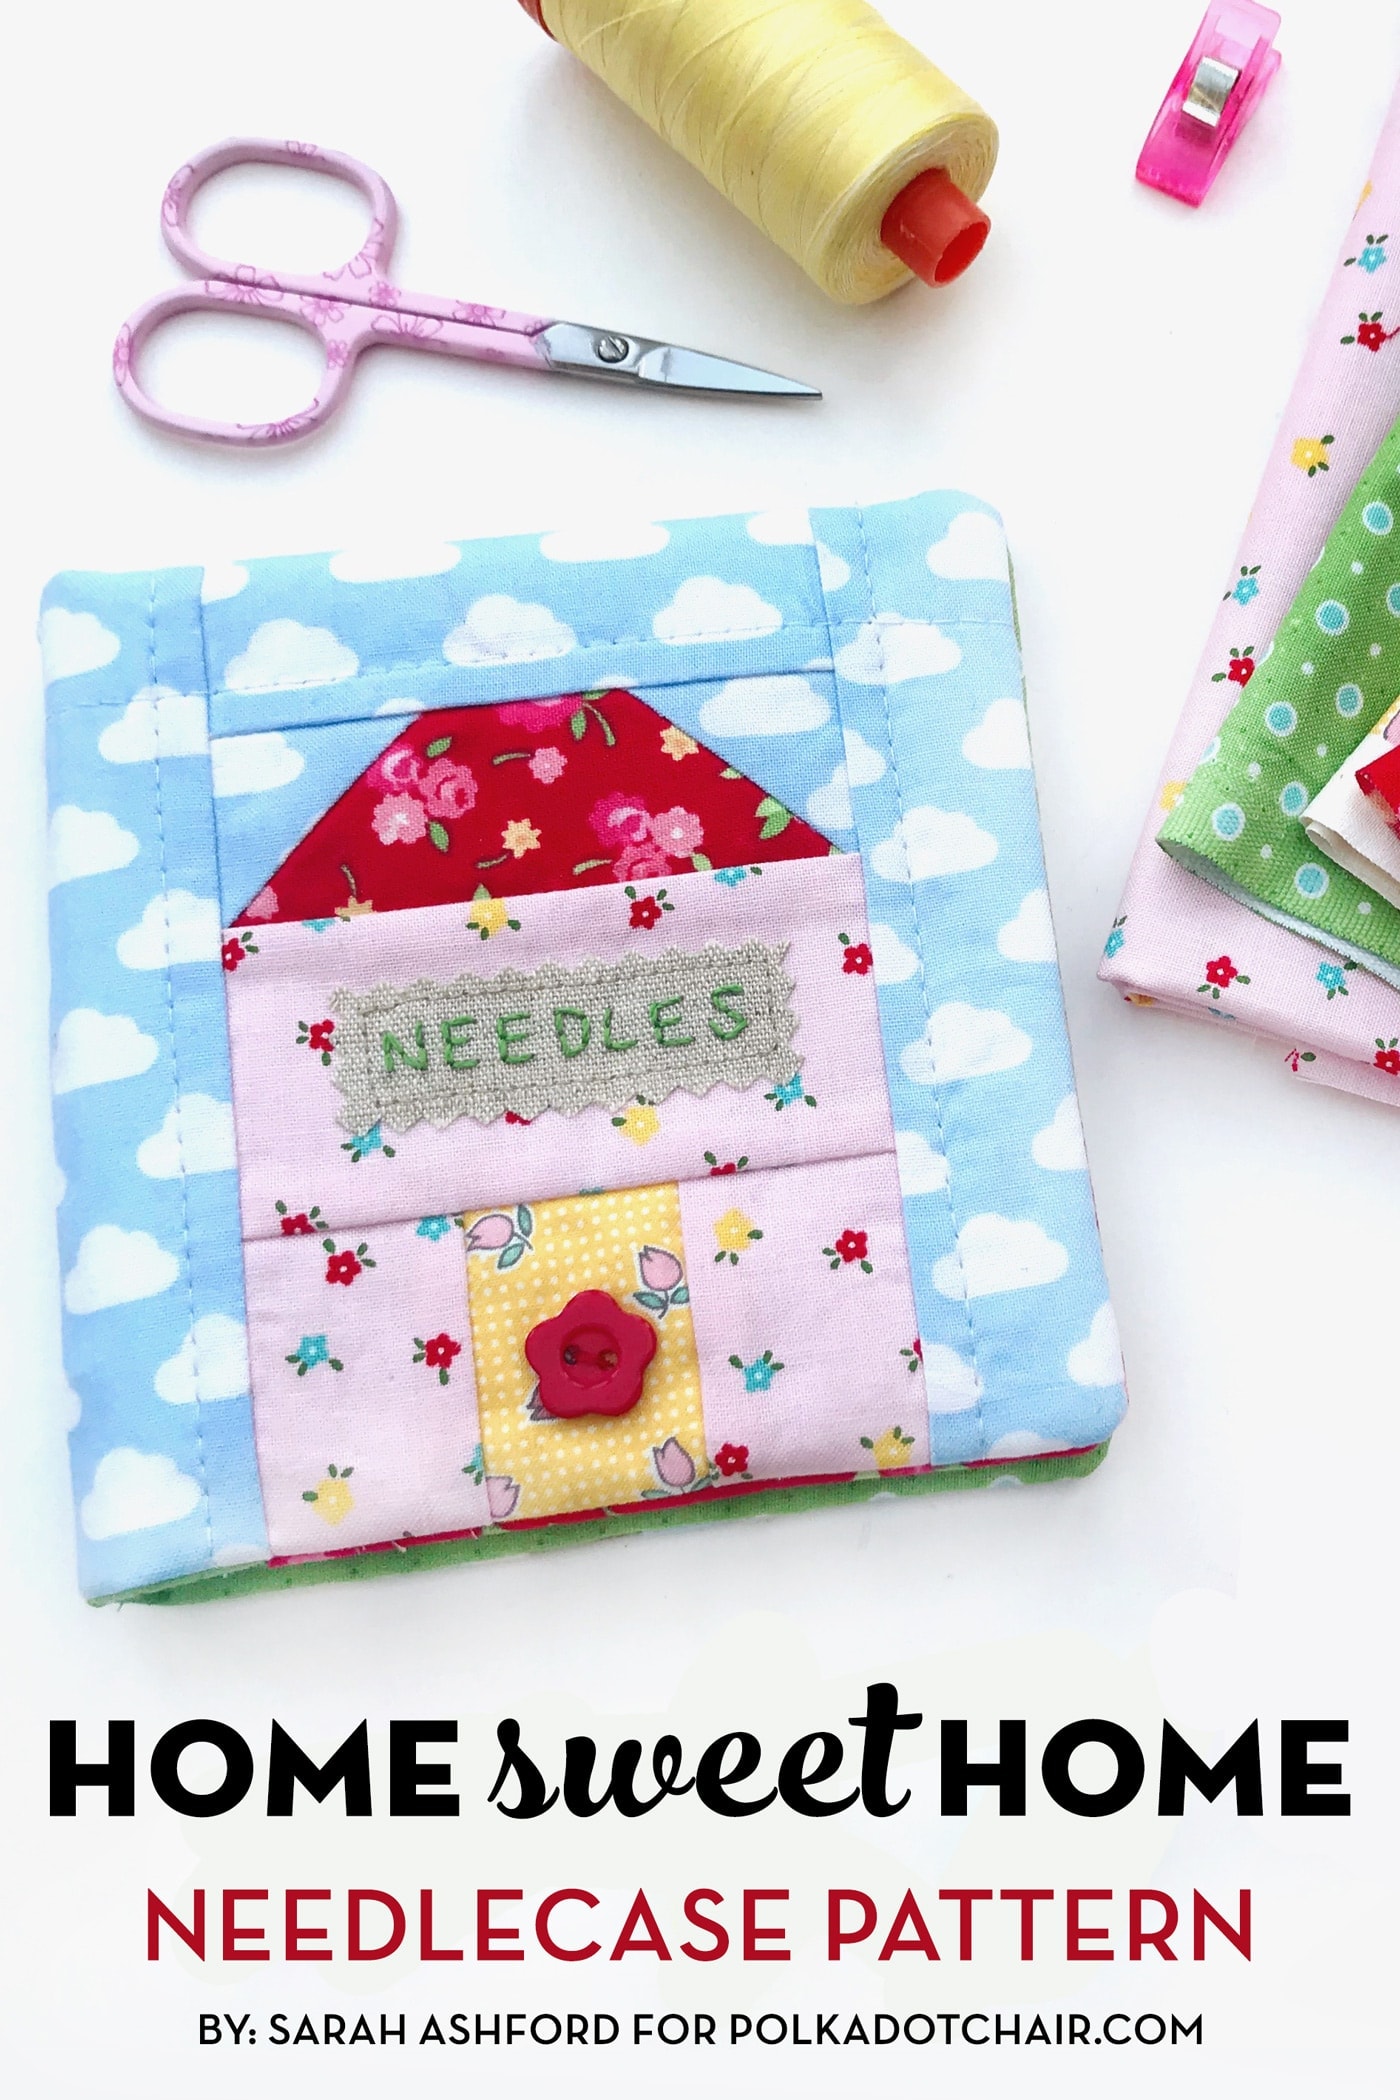 Home Sweet Home Needlecase Pattern